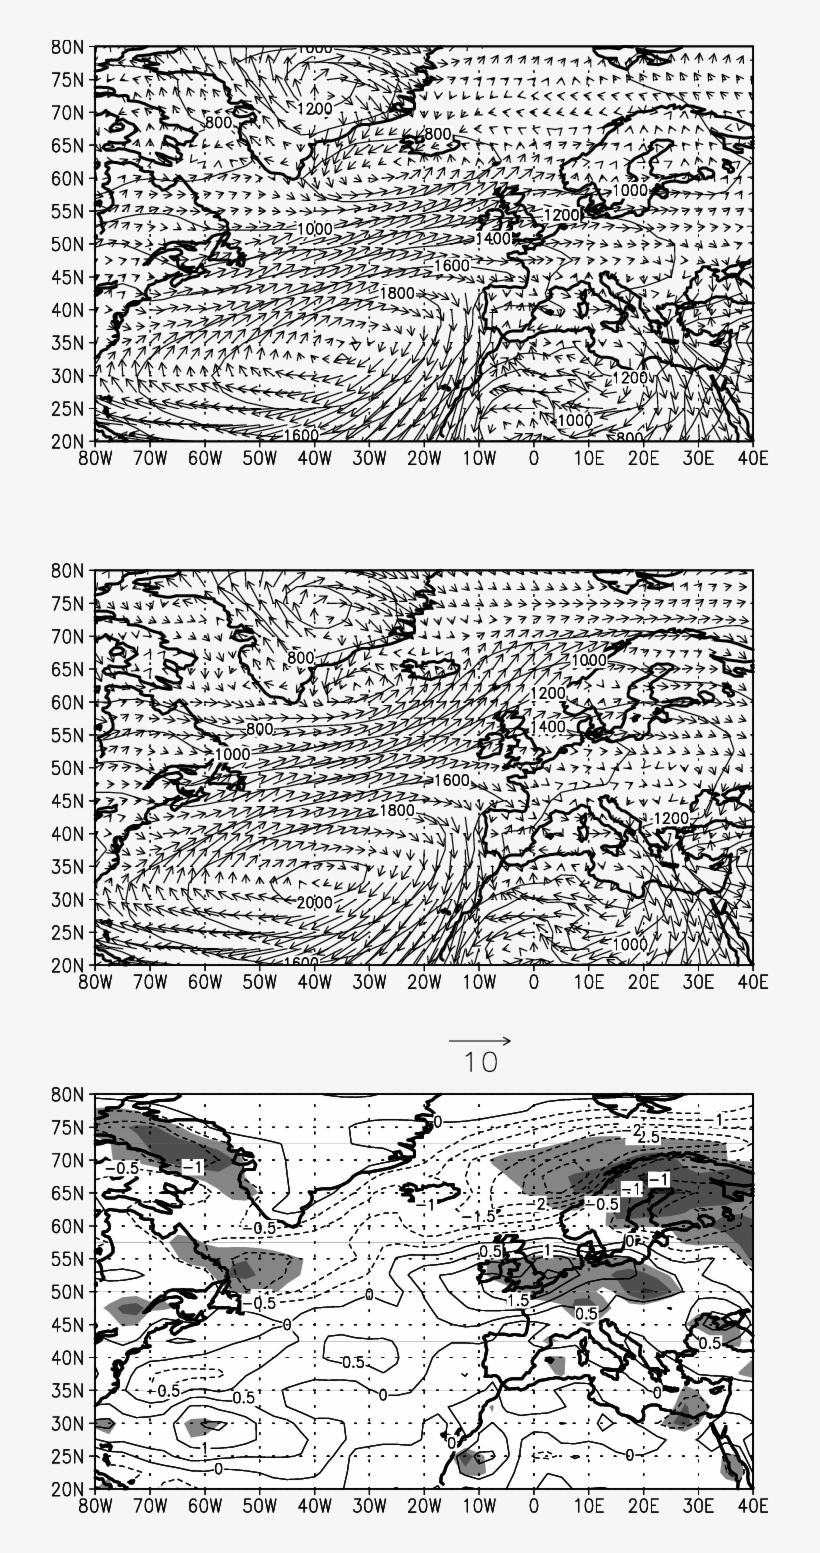 Region 3 1000 Hpa Geopotential Height And Wind Vector - Cartoon, transparent png #683252